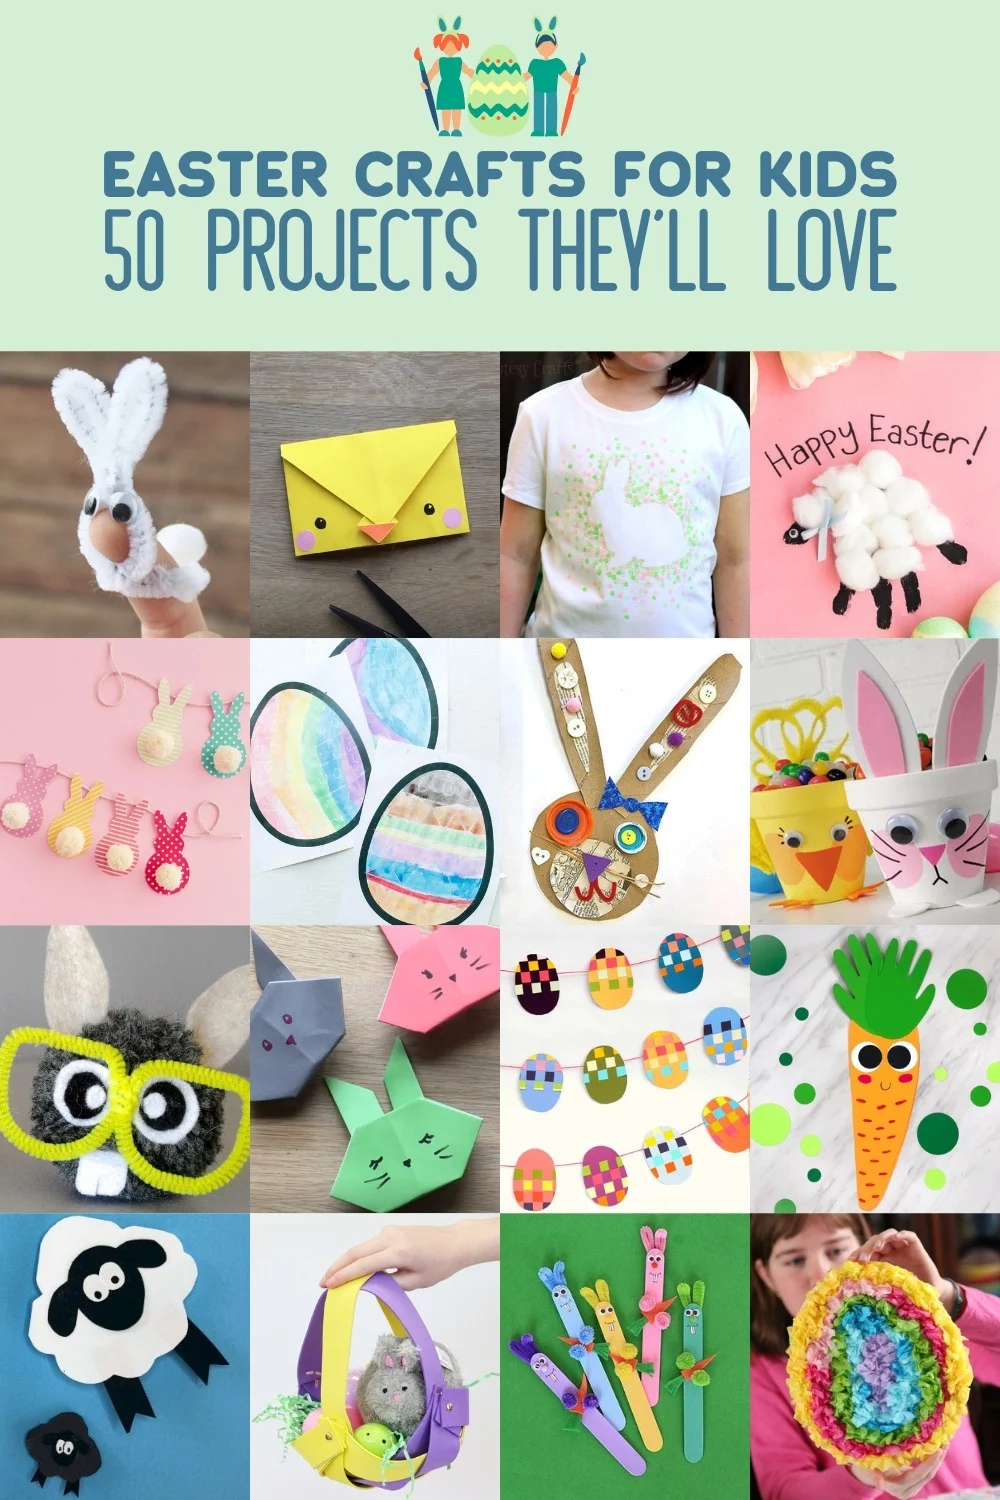 50+ Quick & Easy Kids Crafts that ANYONE Can Make! - Happiness is Homemade